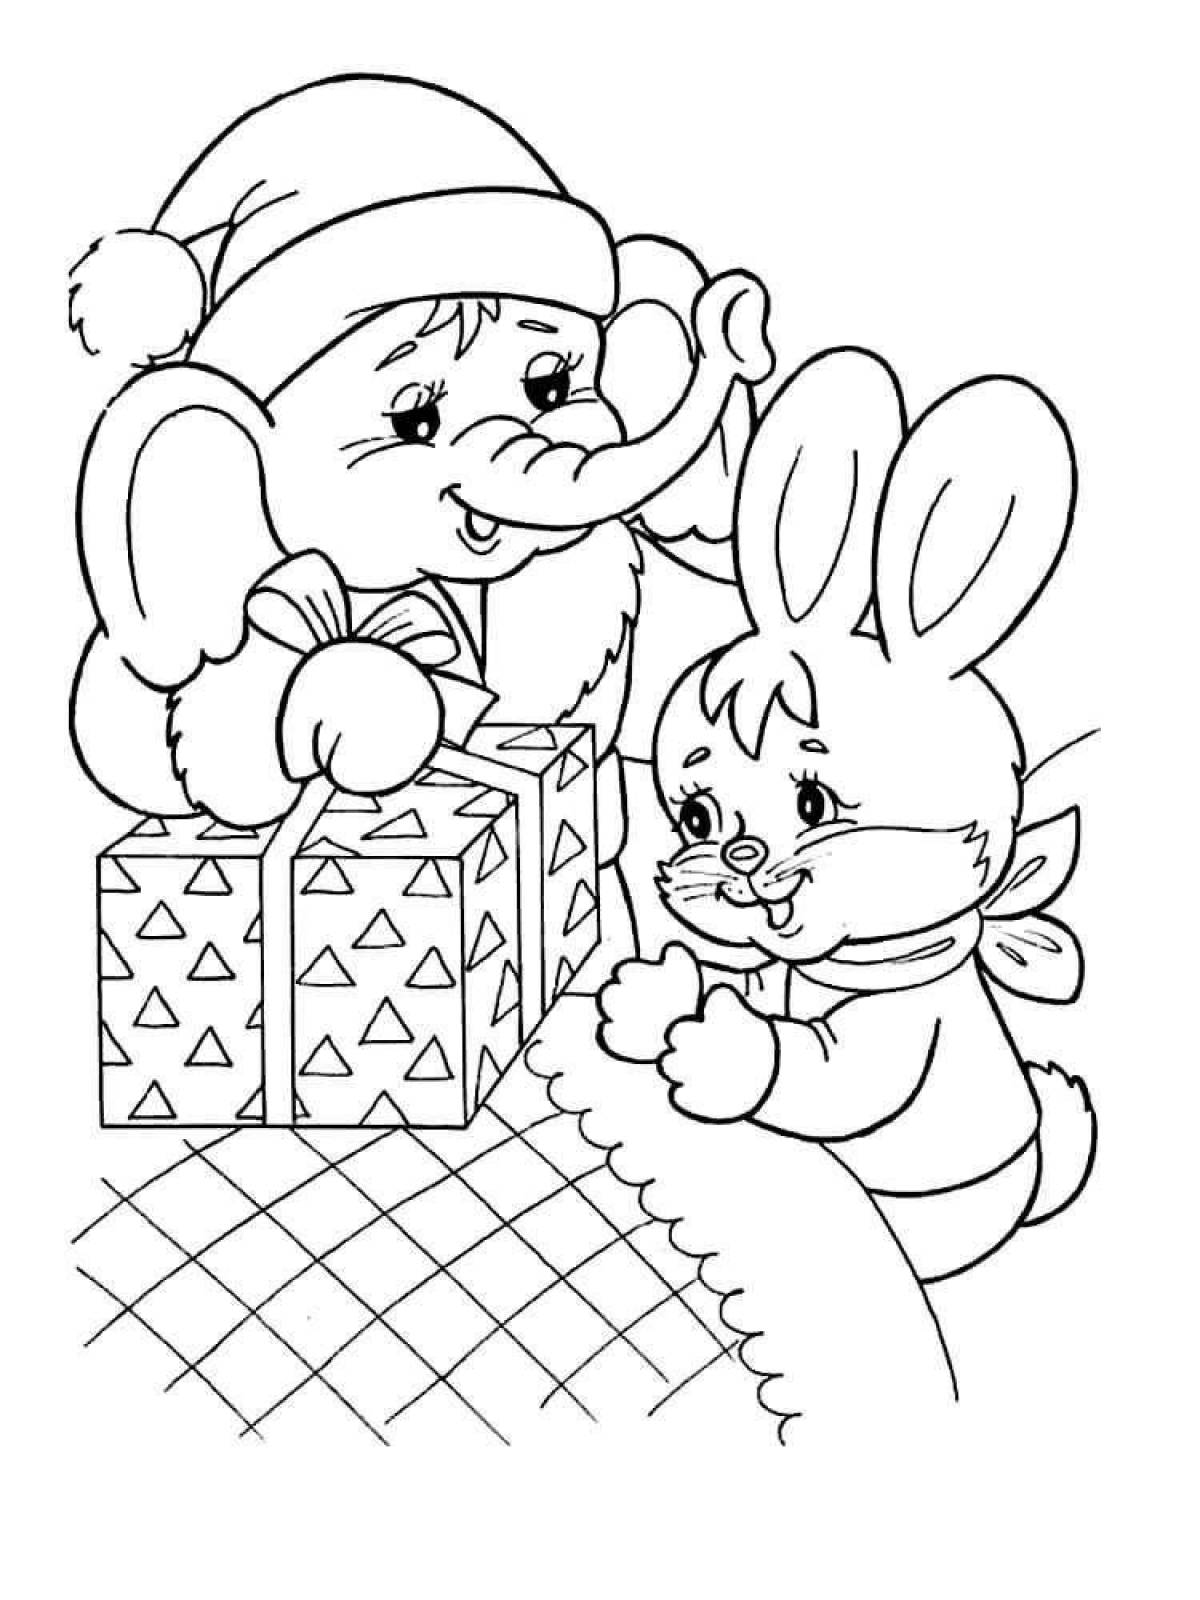 Charming bunny new year coloring book